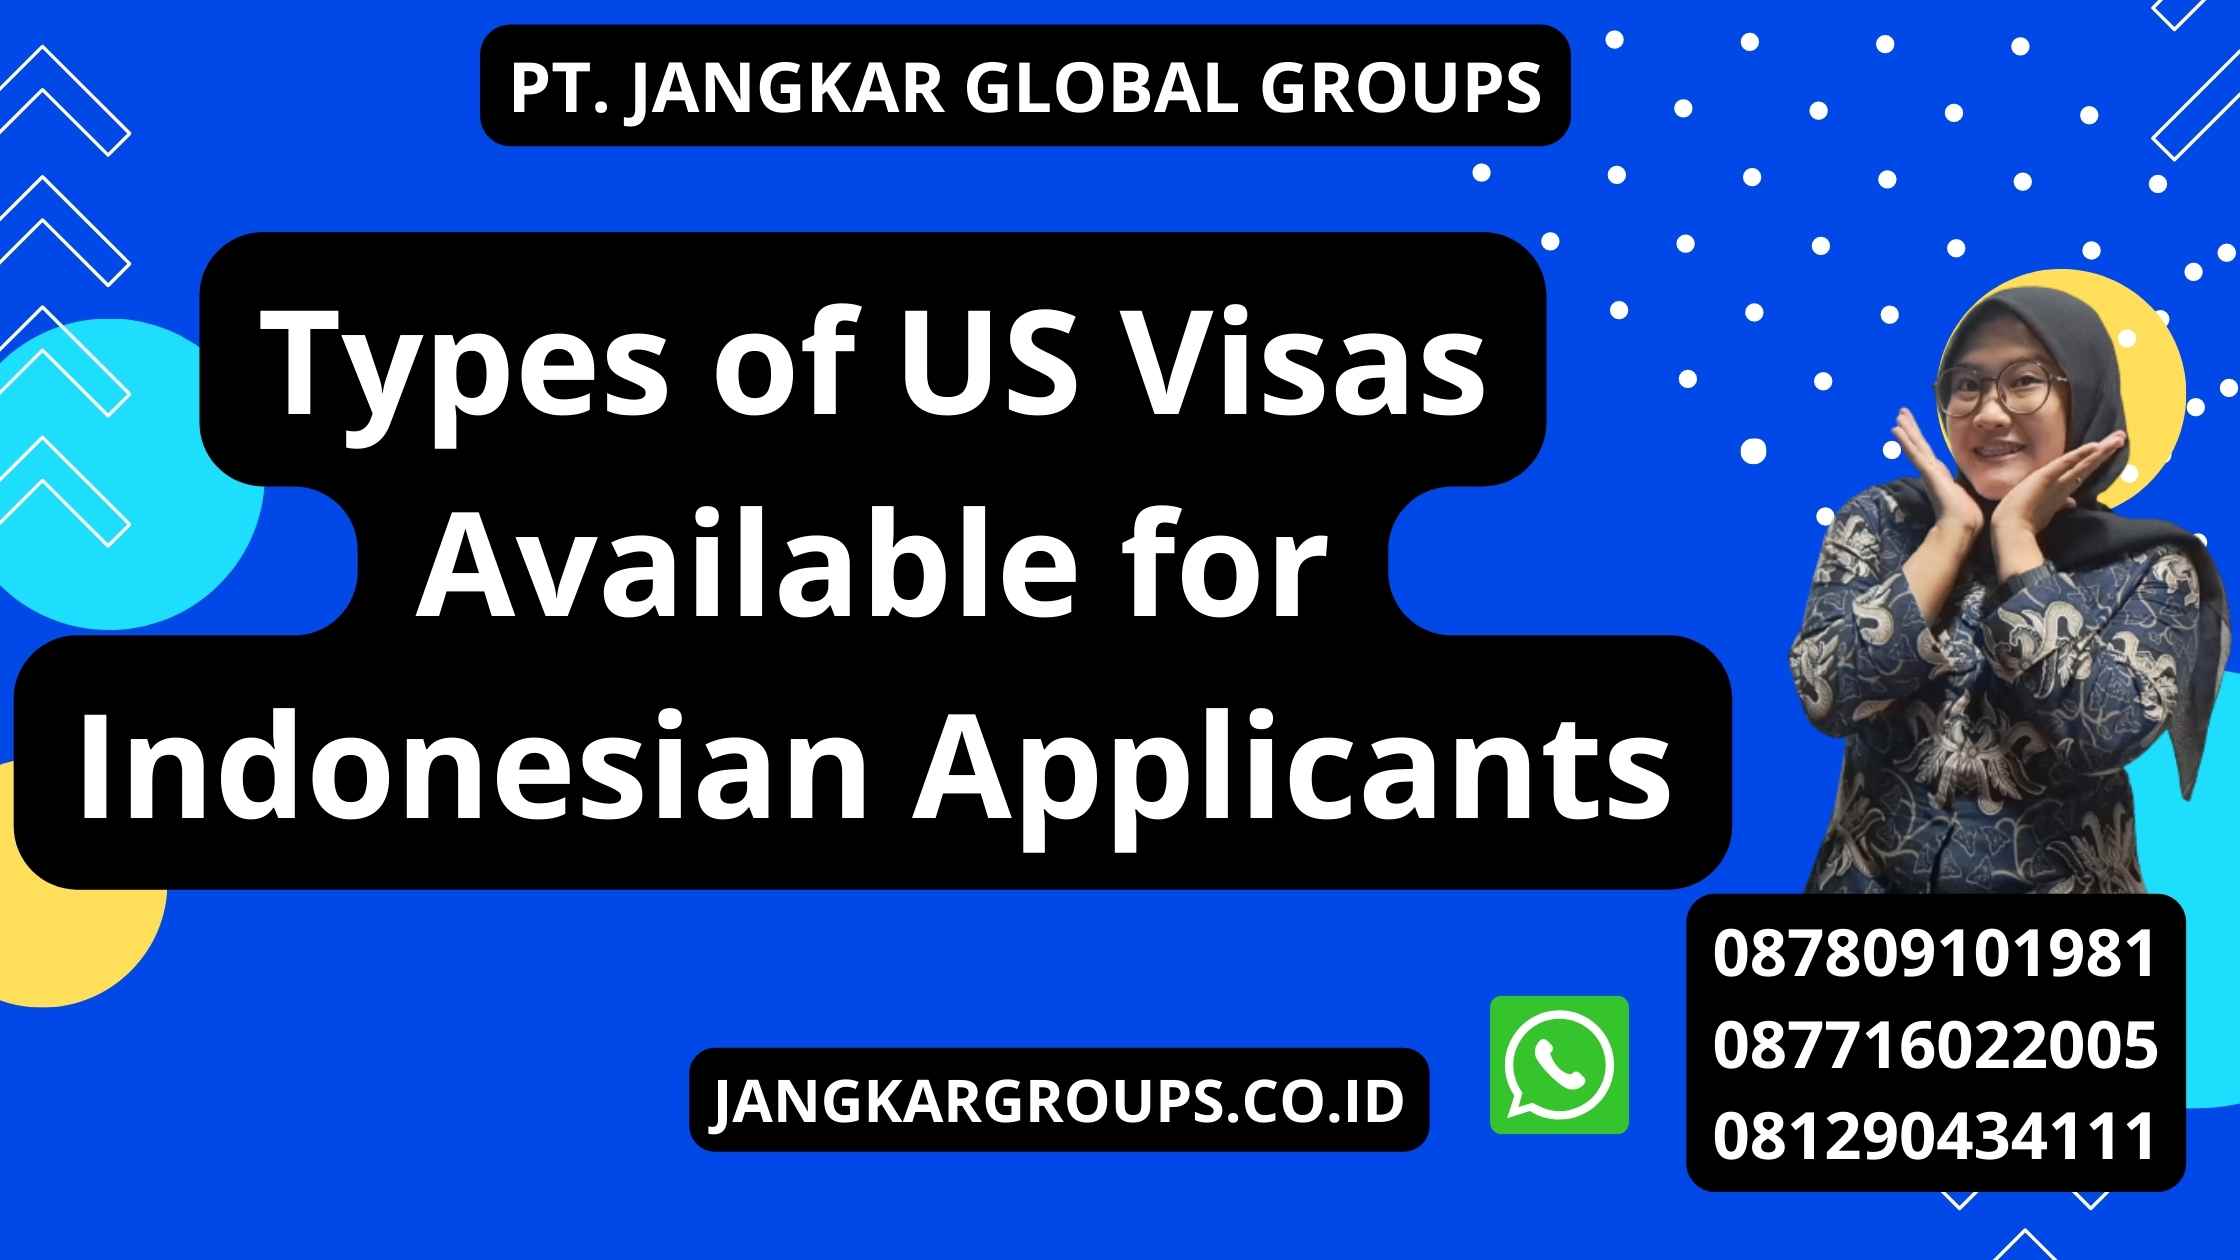 Types of US Visas Available for Indonesian Applicants